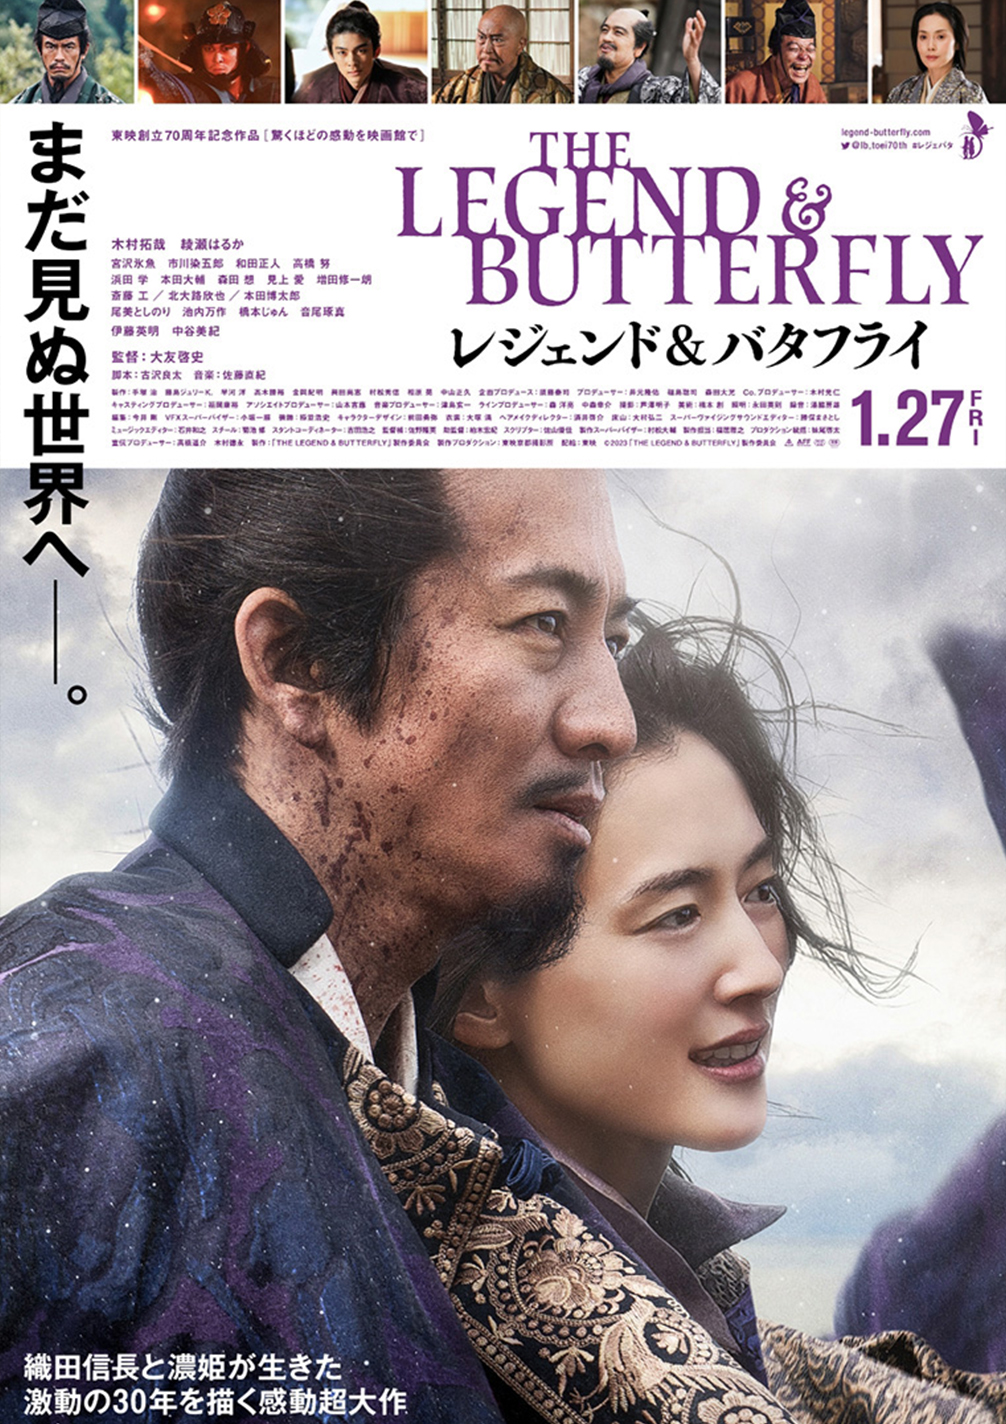 THE LEGEND & BUTTERFLY　メインビジュアル